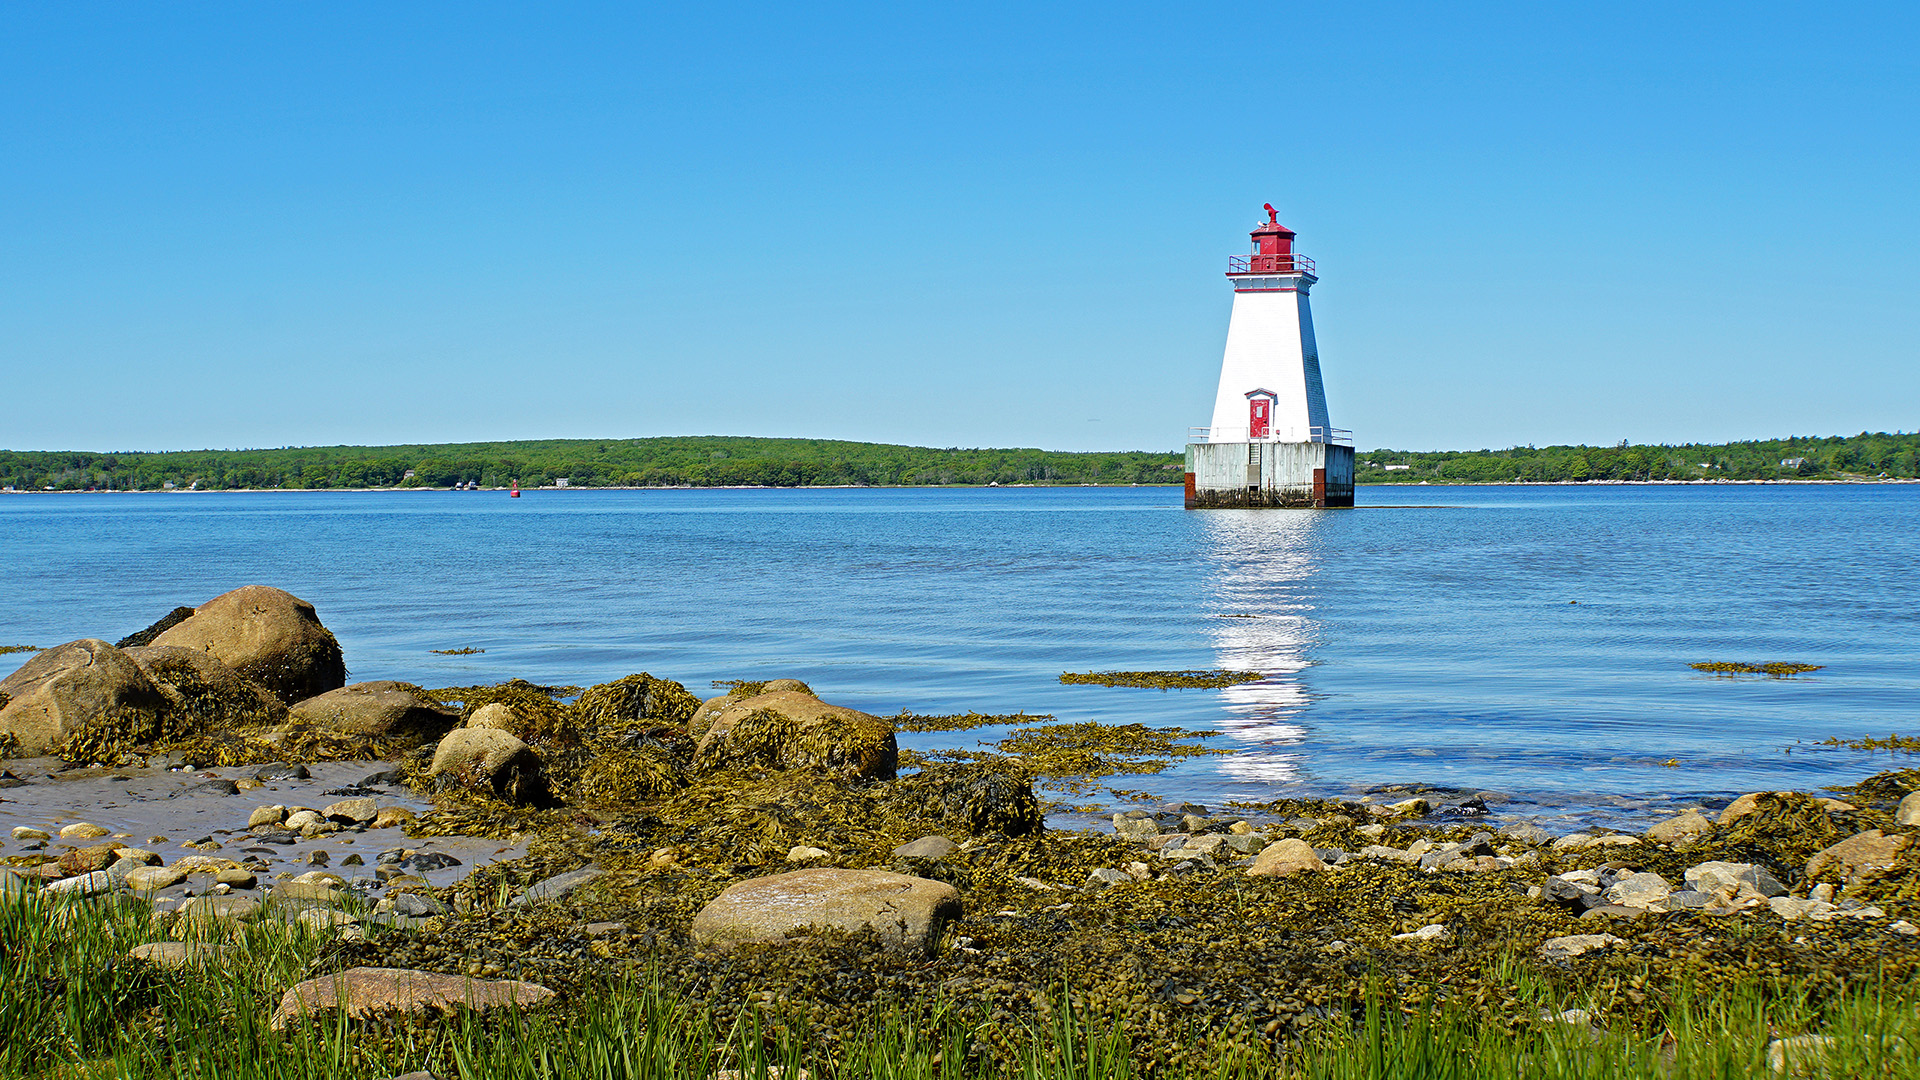 White lighthouse in middle of river